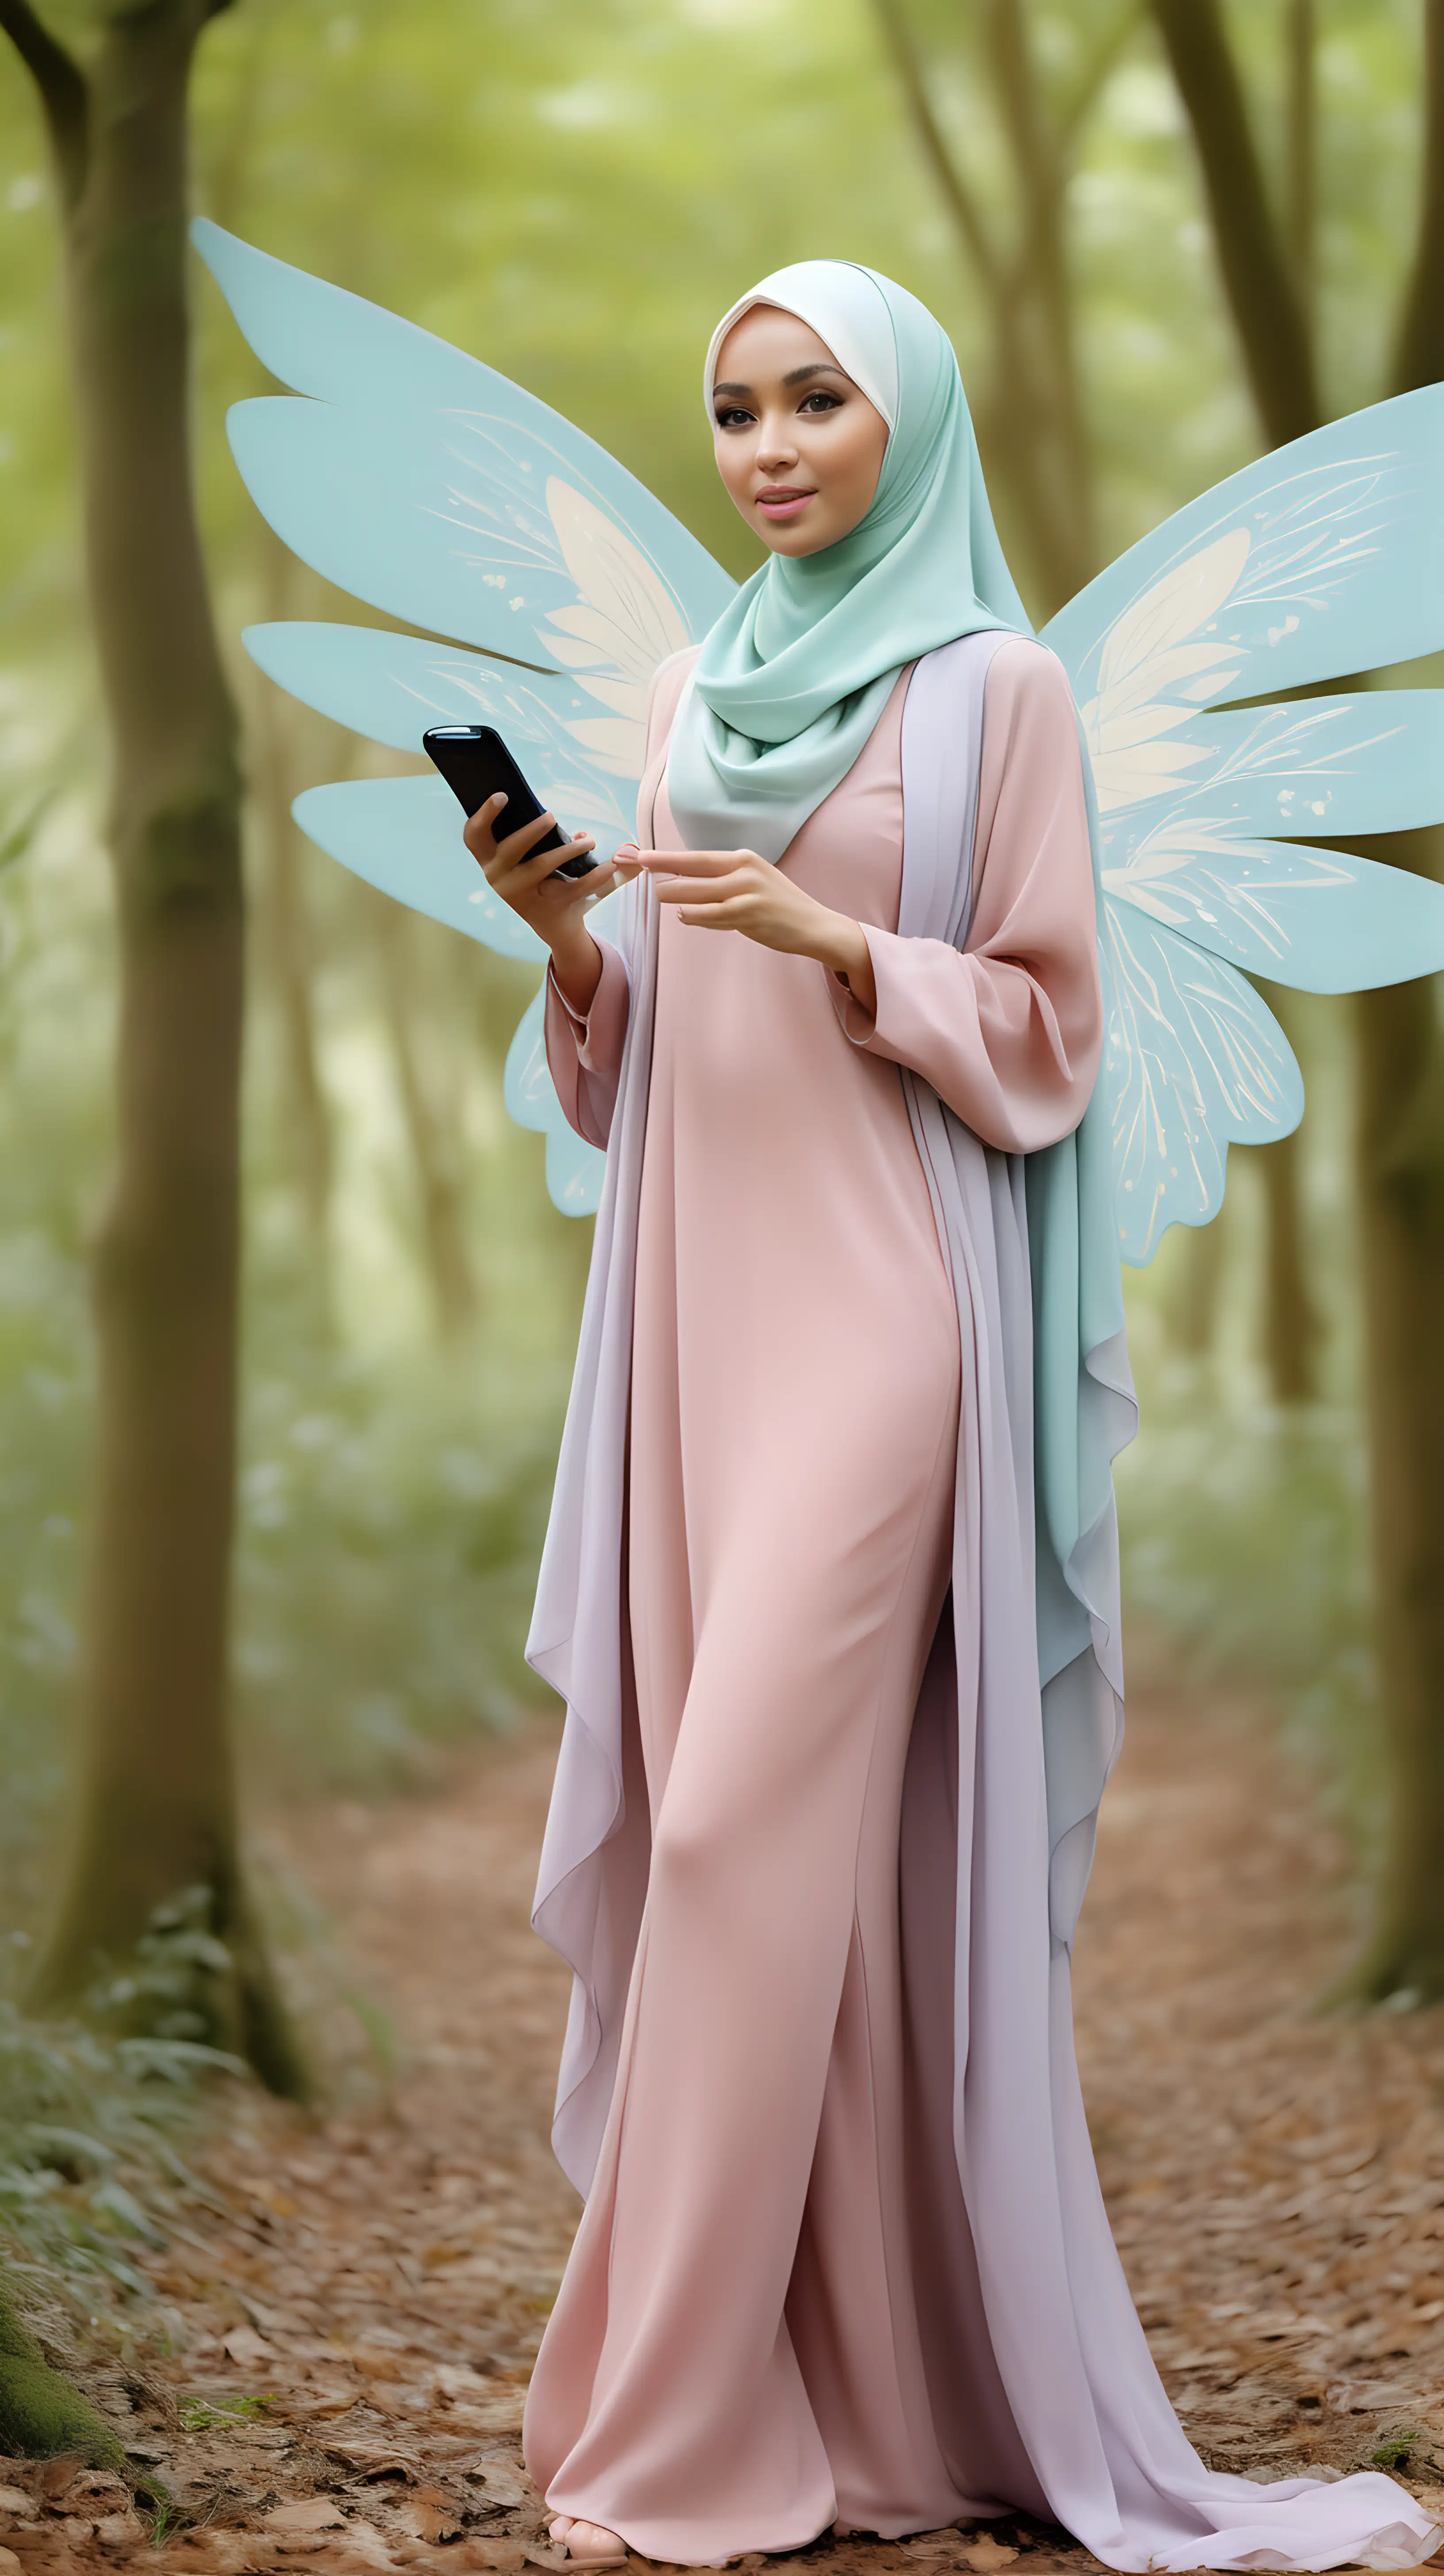 Modern Malay Faerie in Pastel Wonderland with Mobile Phone